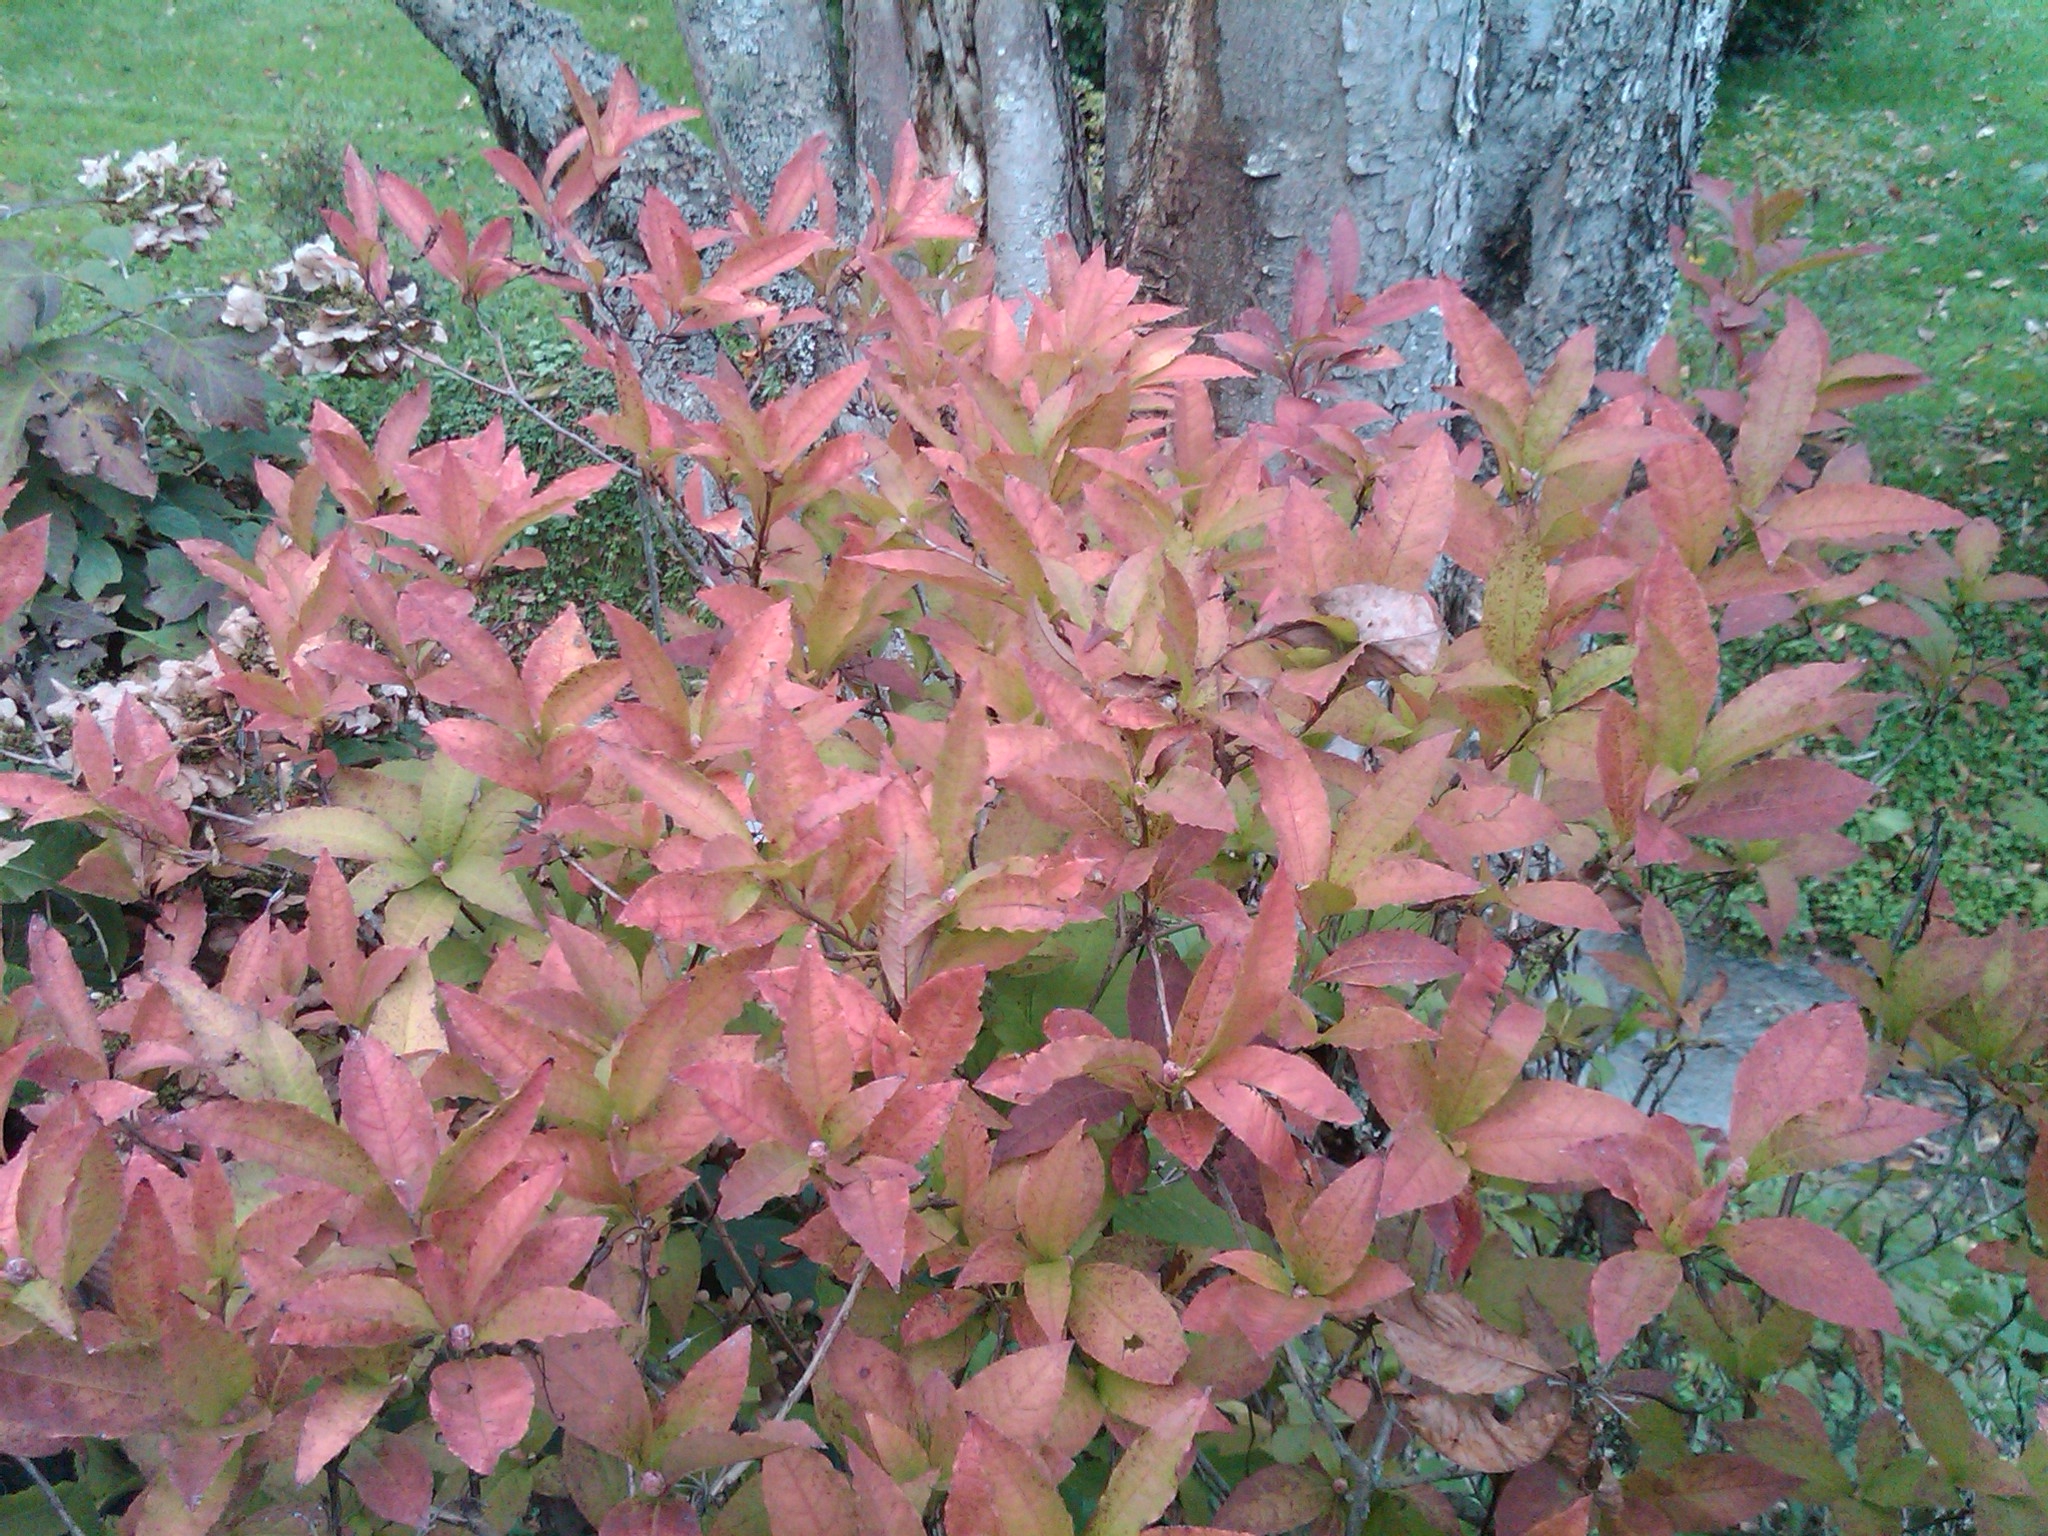 Fall Color In U S Native Azaleas What Grows There Hugh Conlon Horticulturalist Professor Lecturer And Gardener